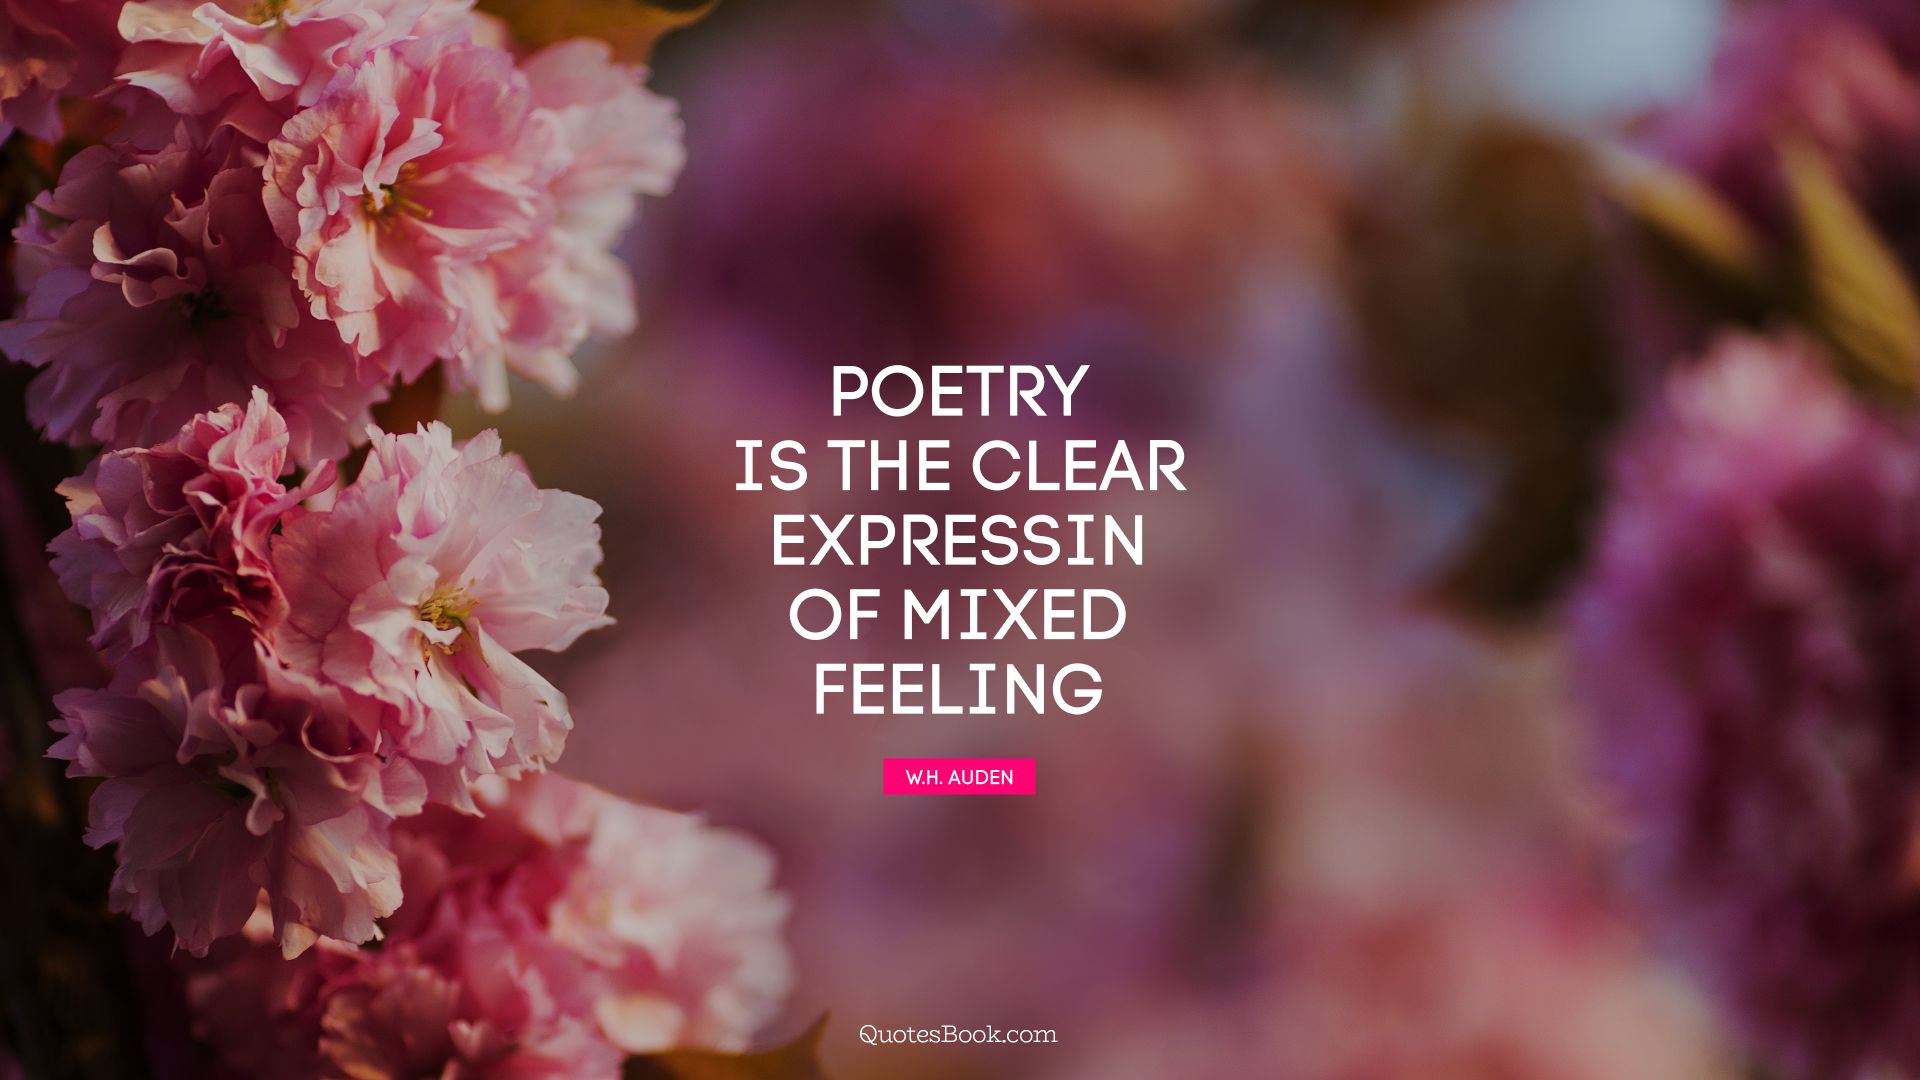 Poetry is the clear expressin of mixed feeling. - Quote by W. H. Auden